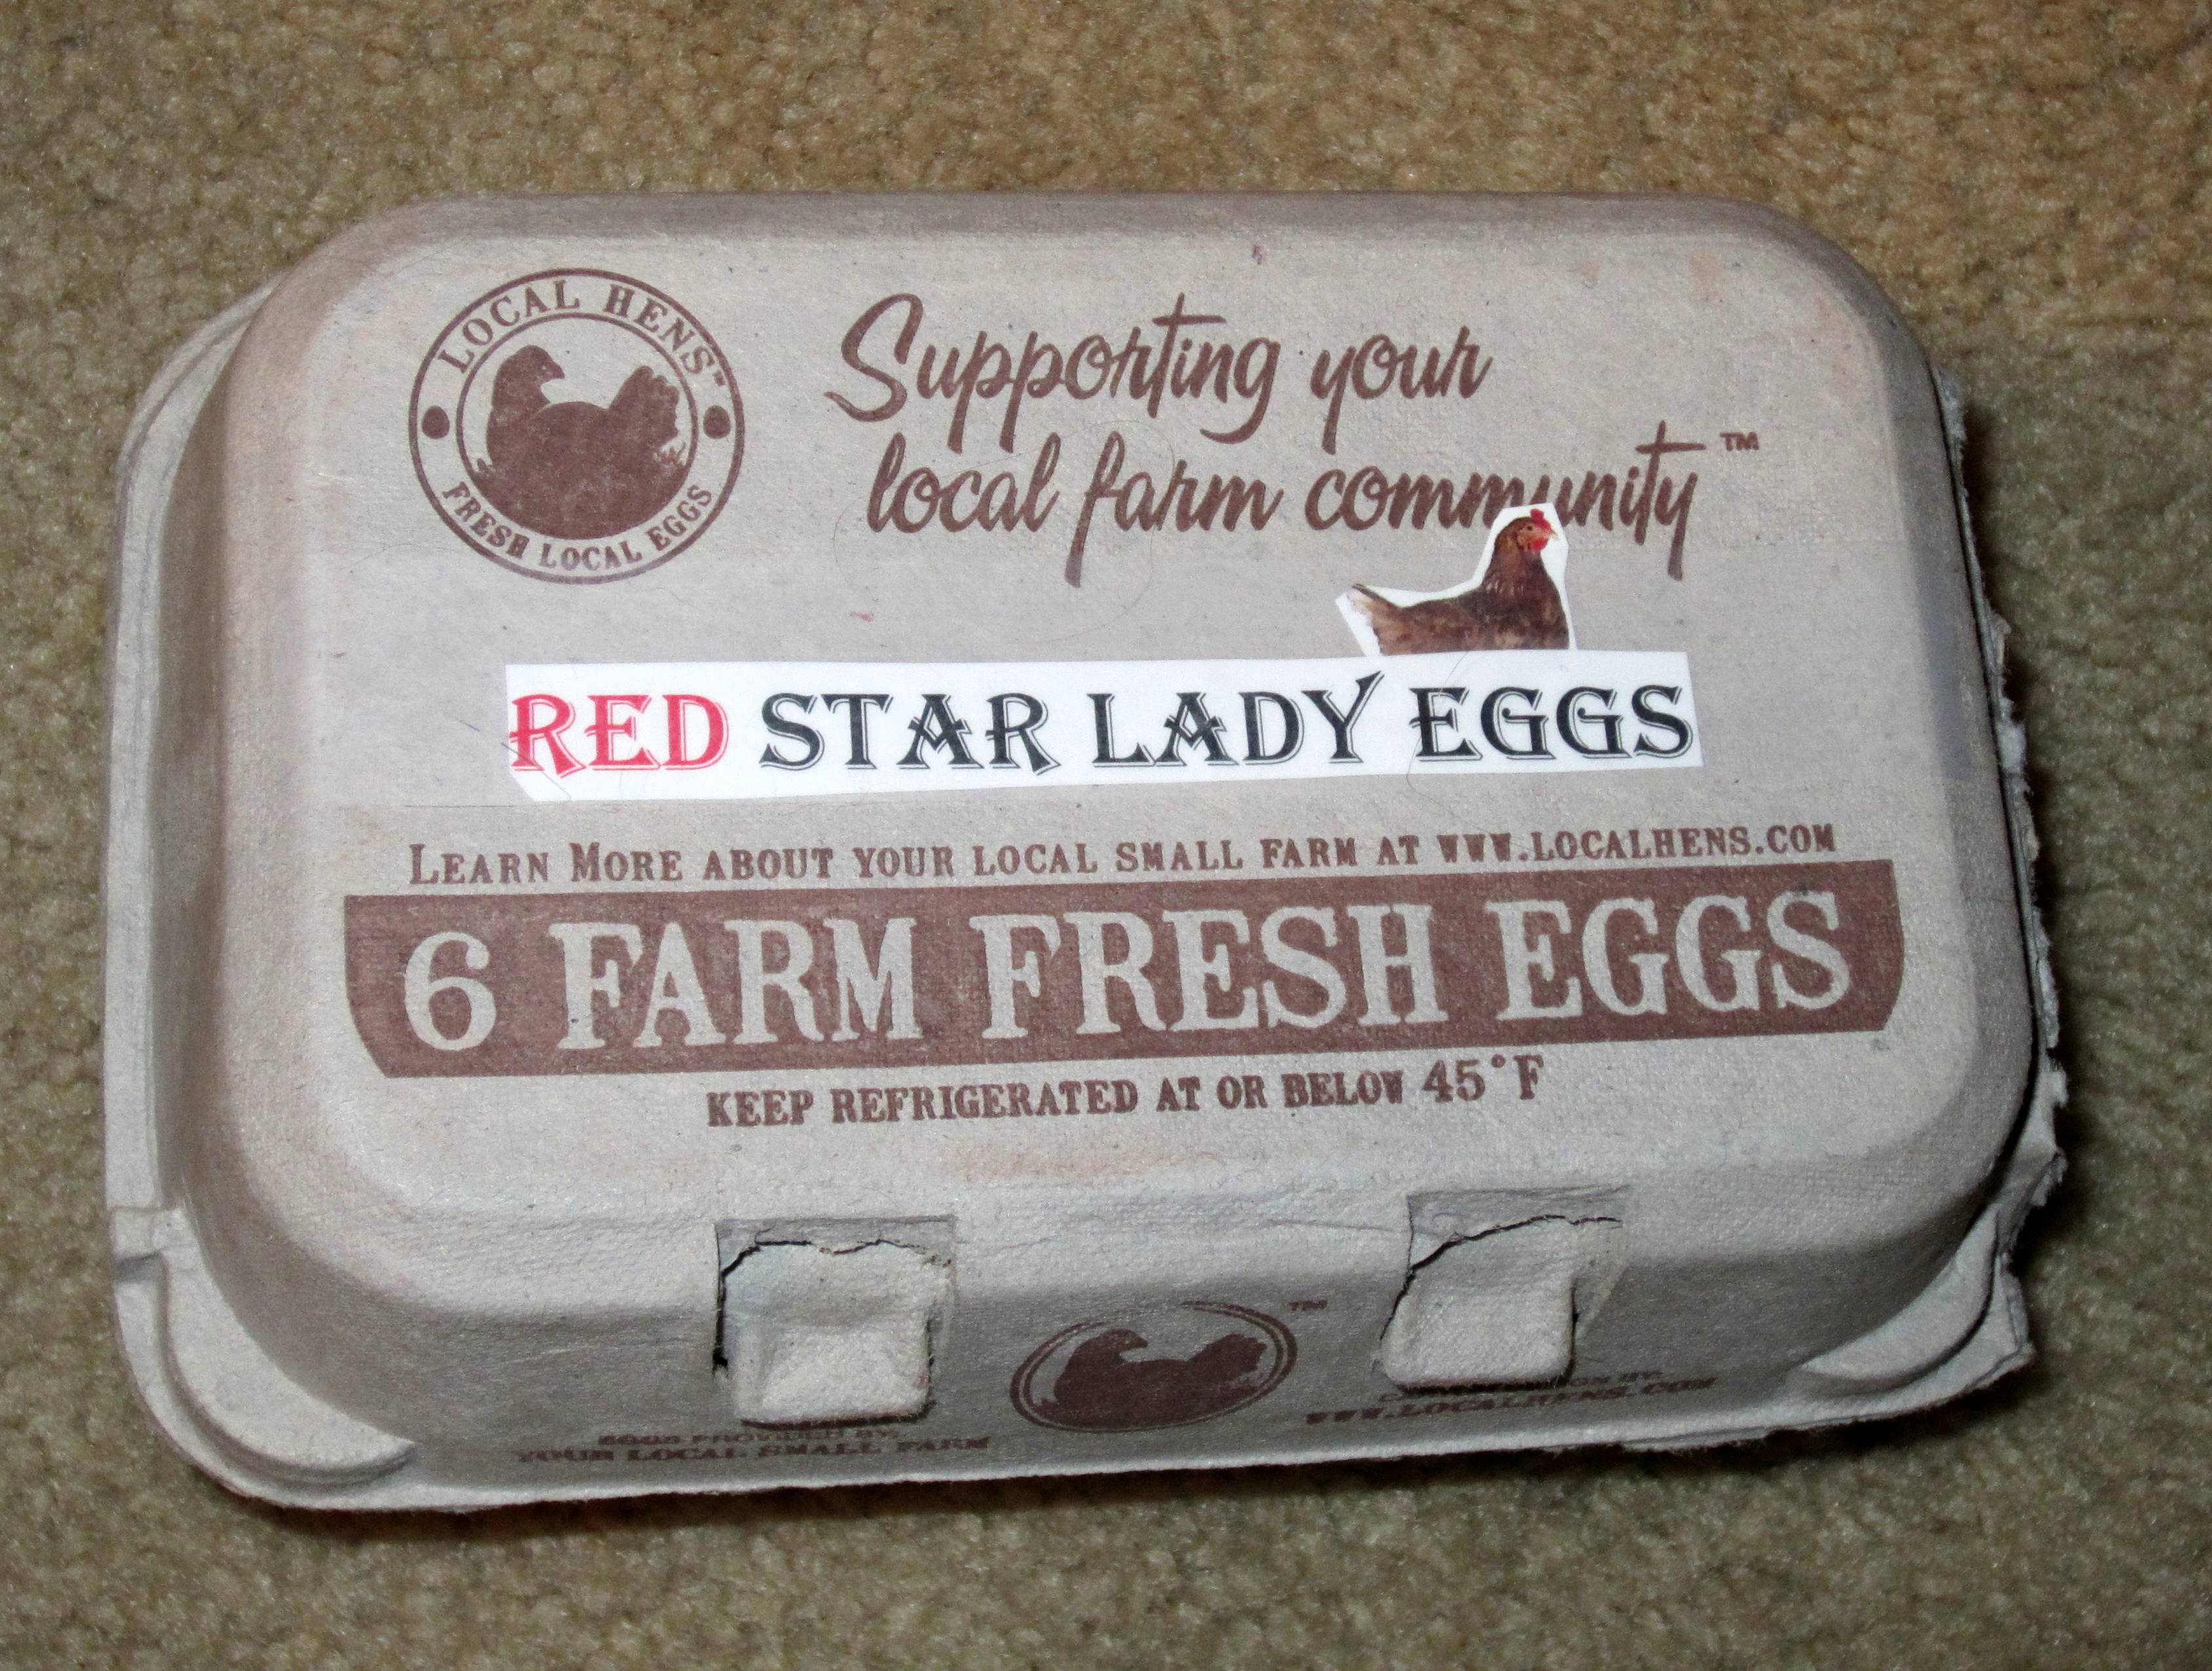 Protype of my egg carton (to give away my eggs to friends and co-workers).